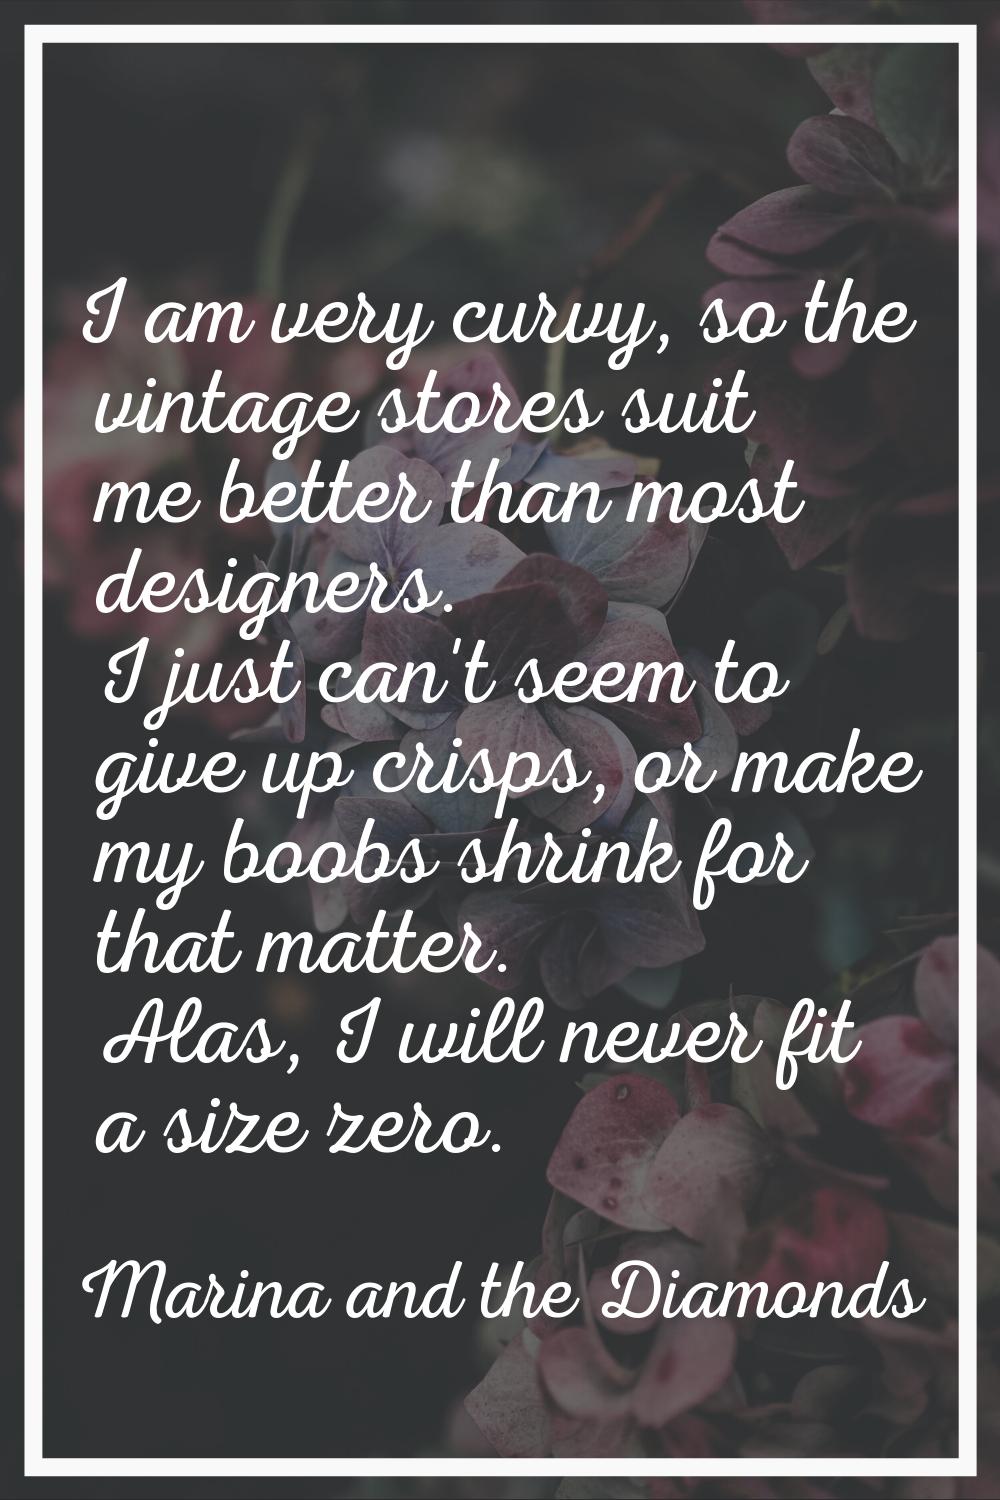 I am very curvy, so the vintage stores suit me better than most designers. I just can't seem to giv